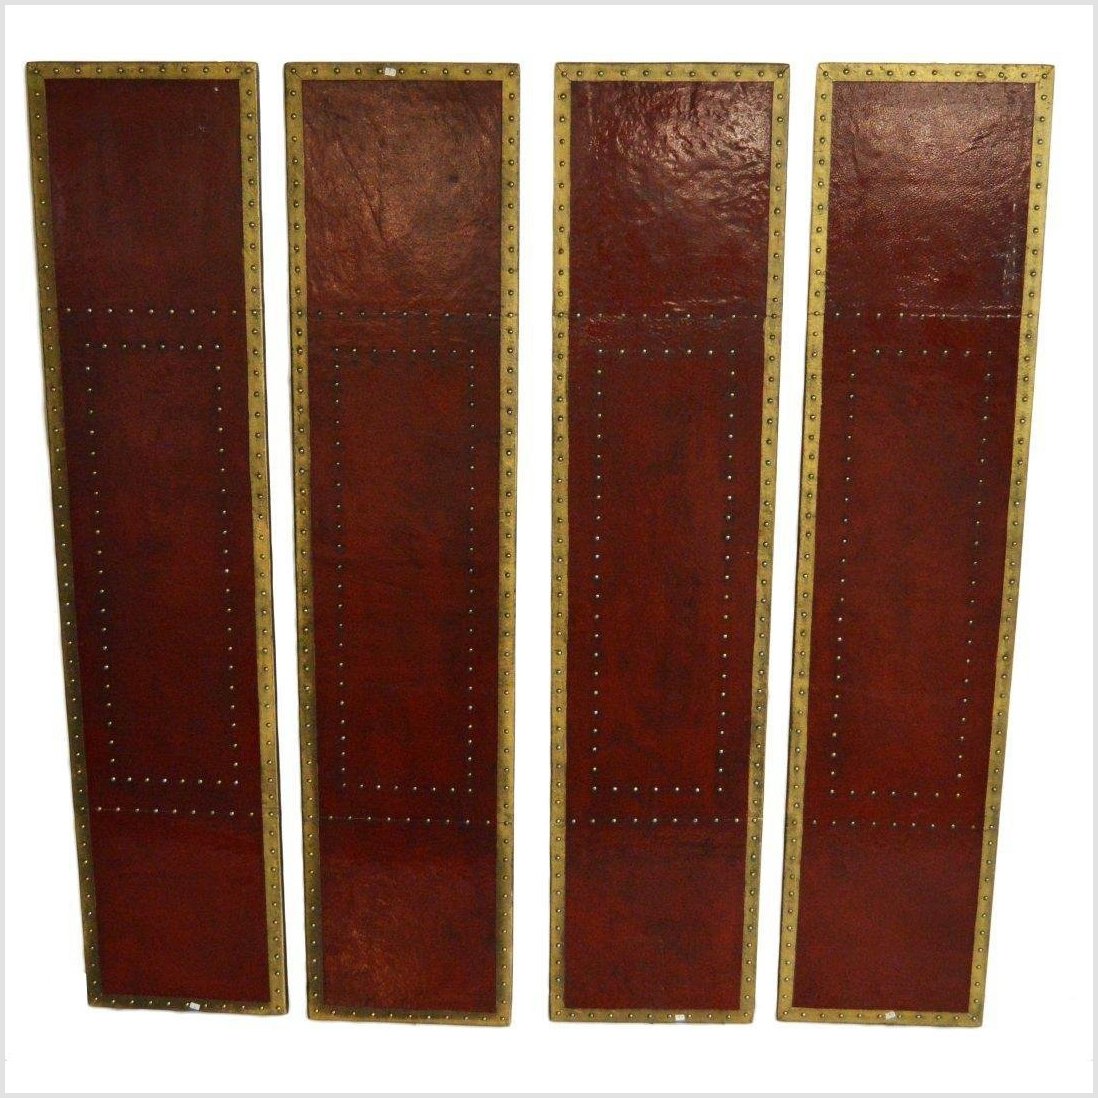 4-Panel Oxblood Screen with Gold Accents and Rivets-YN2903-1. Asian & Chinese Furniture, Art, Antiques, Vintage Home Décor for sale at FEA Home